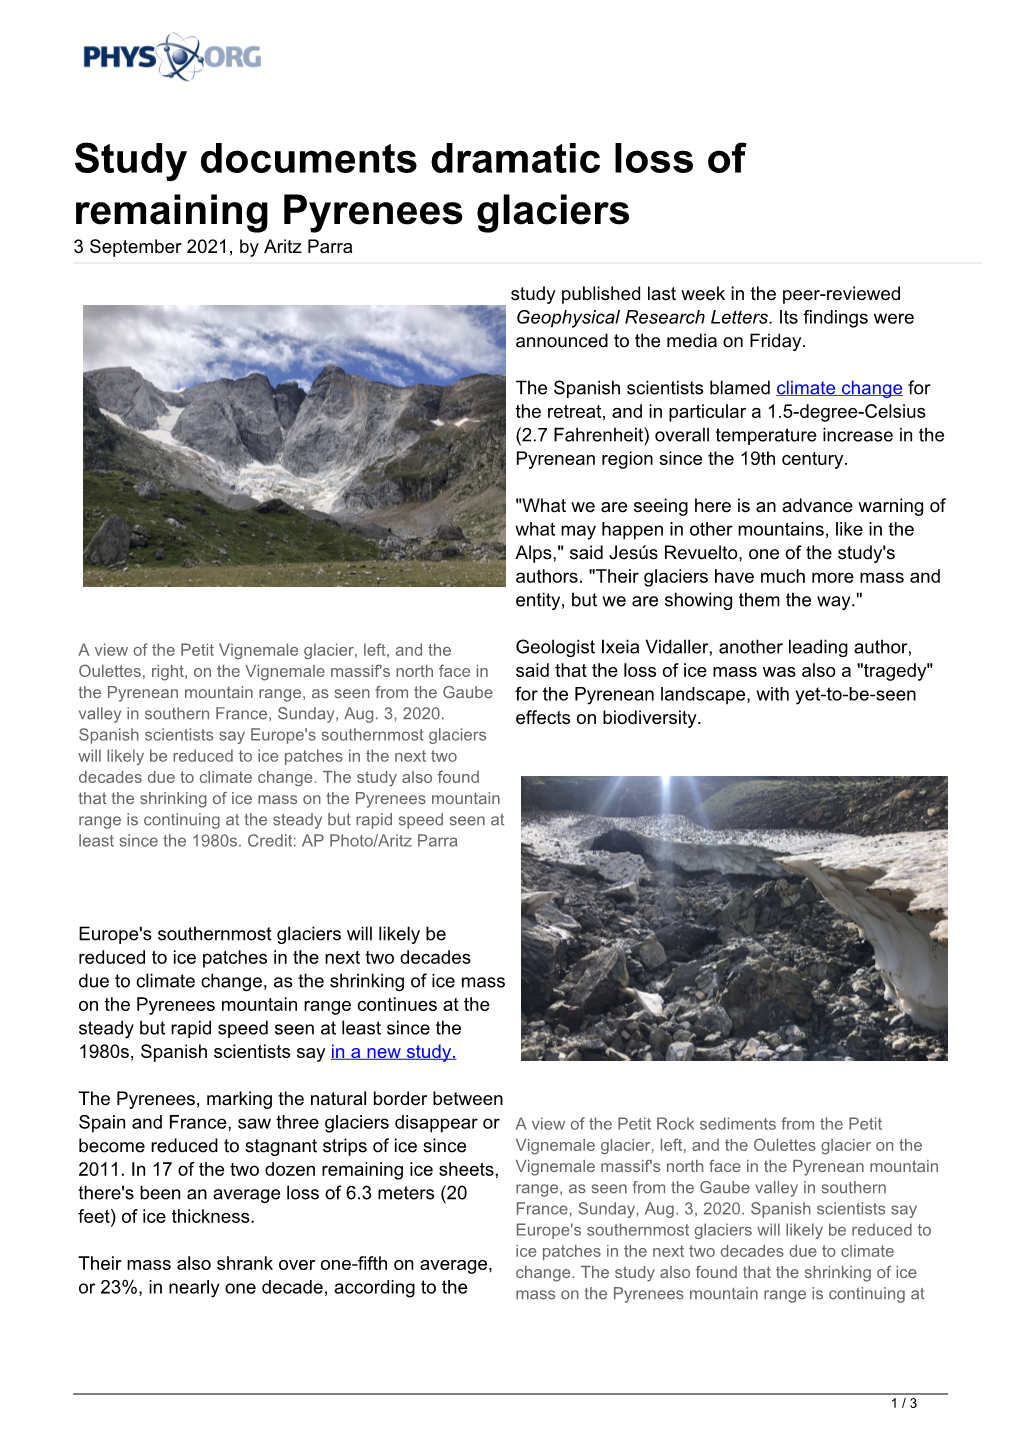 Study Documents Dramatic Loss of Remaining Pyrenees Glaciers 3 September 2021, by Aritz Parra